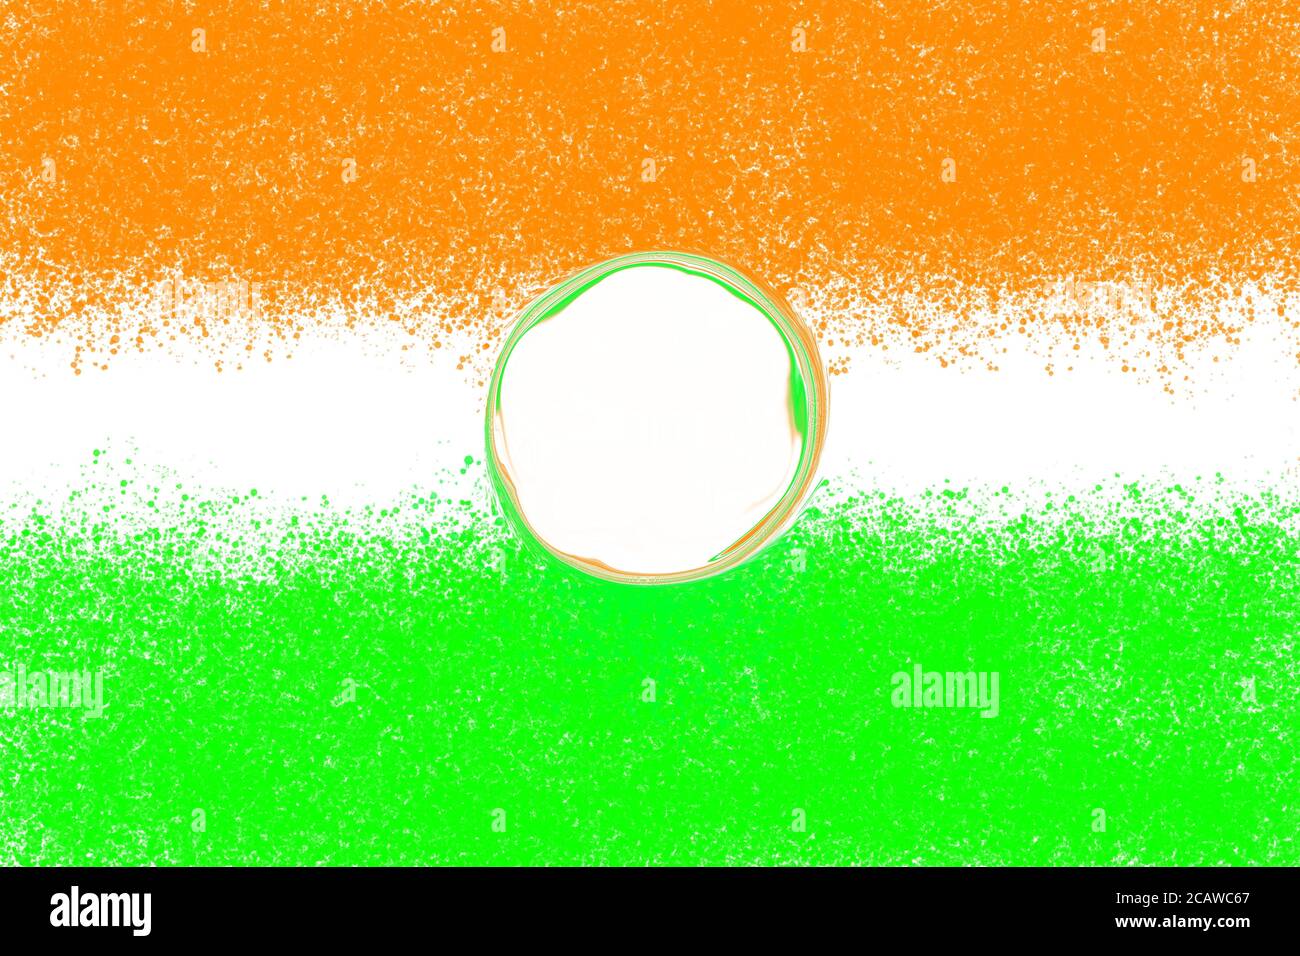 Illustration of the bright Indian flag colors Stock Photo - Alamy